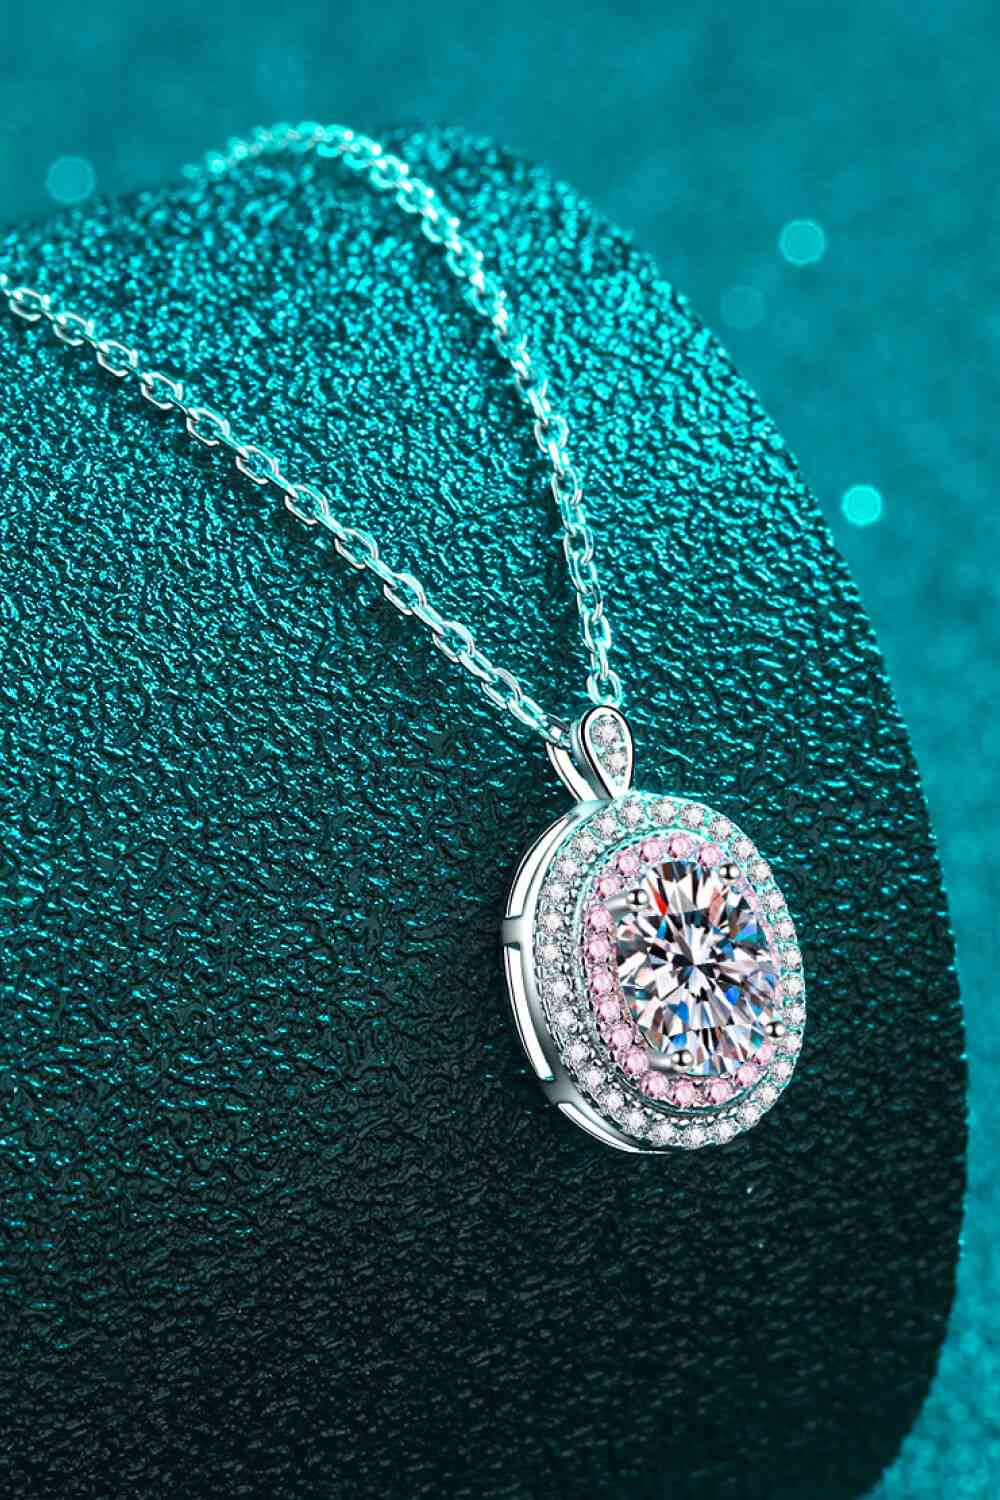 Adored 925 Sterling Silver Rhodium-Plated 1 Carat Moissanite Pendant Necklace